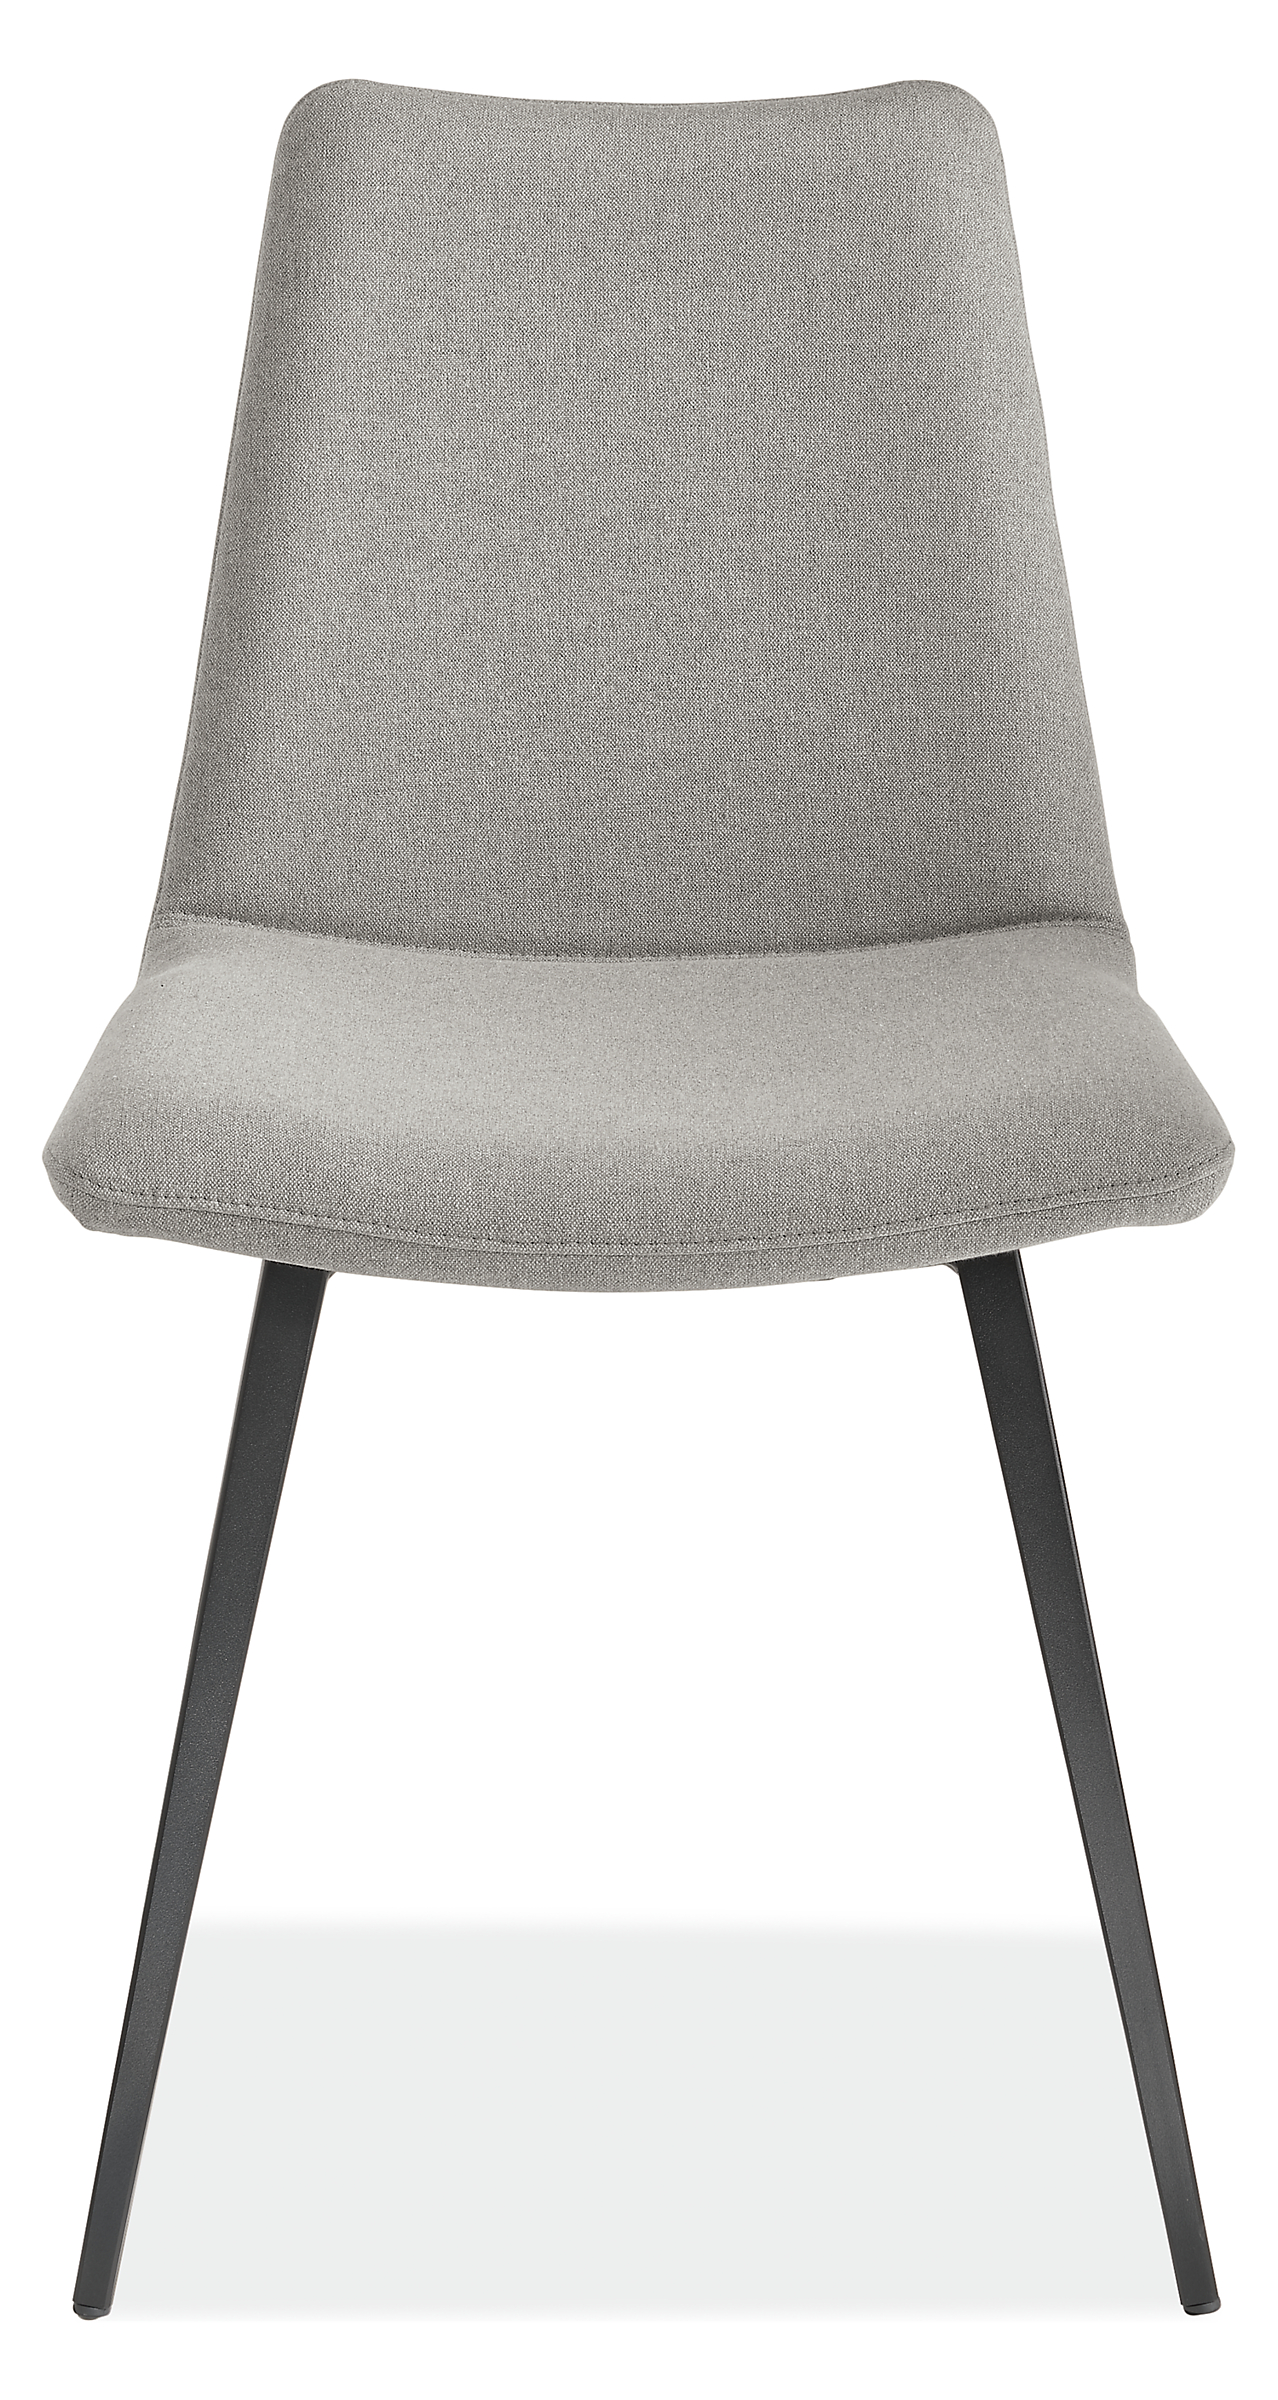 Front view of Arthur Dining Chair in Fabric with Metal Legs.